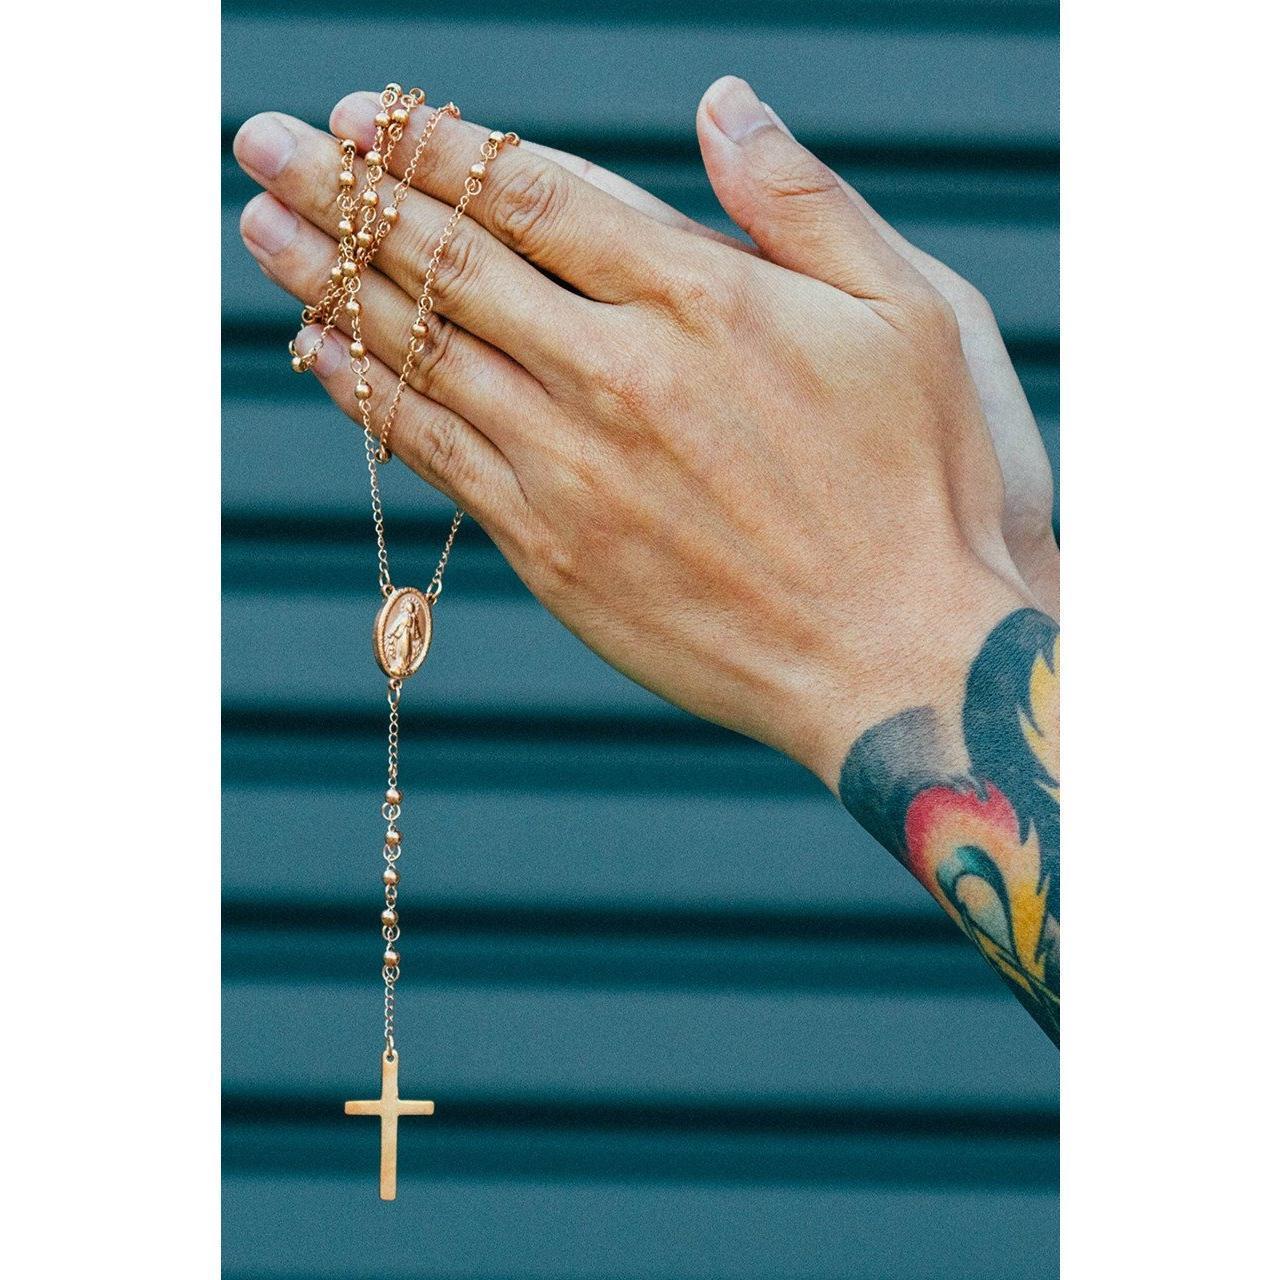 Mister Rosary Necklace - Mister SFC - Fashion Jewelry - Fashion Accessories